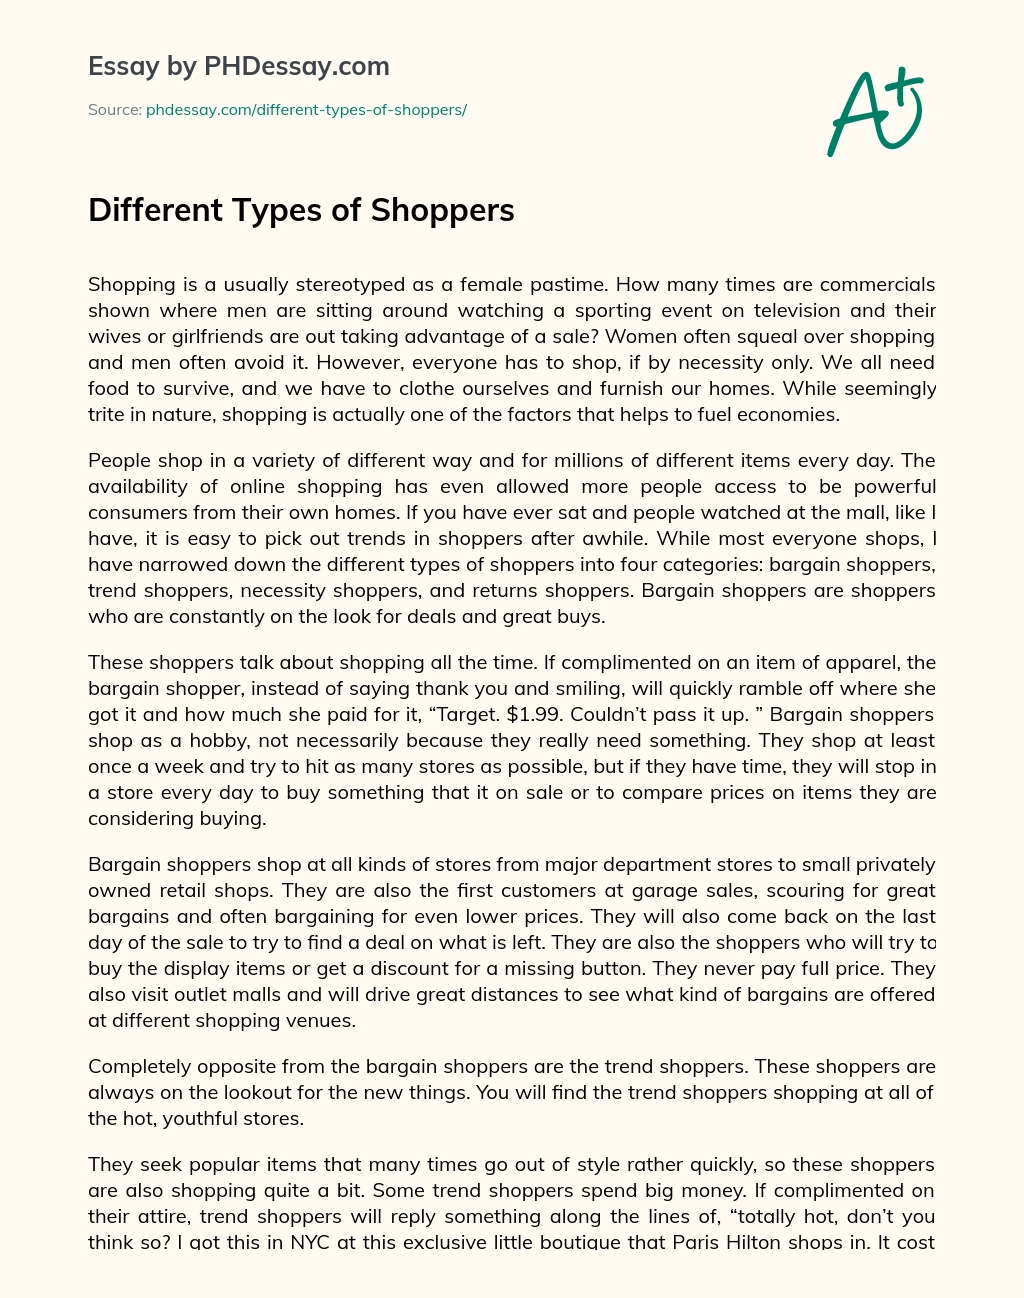 Different Types of Shoppers essay